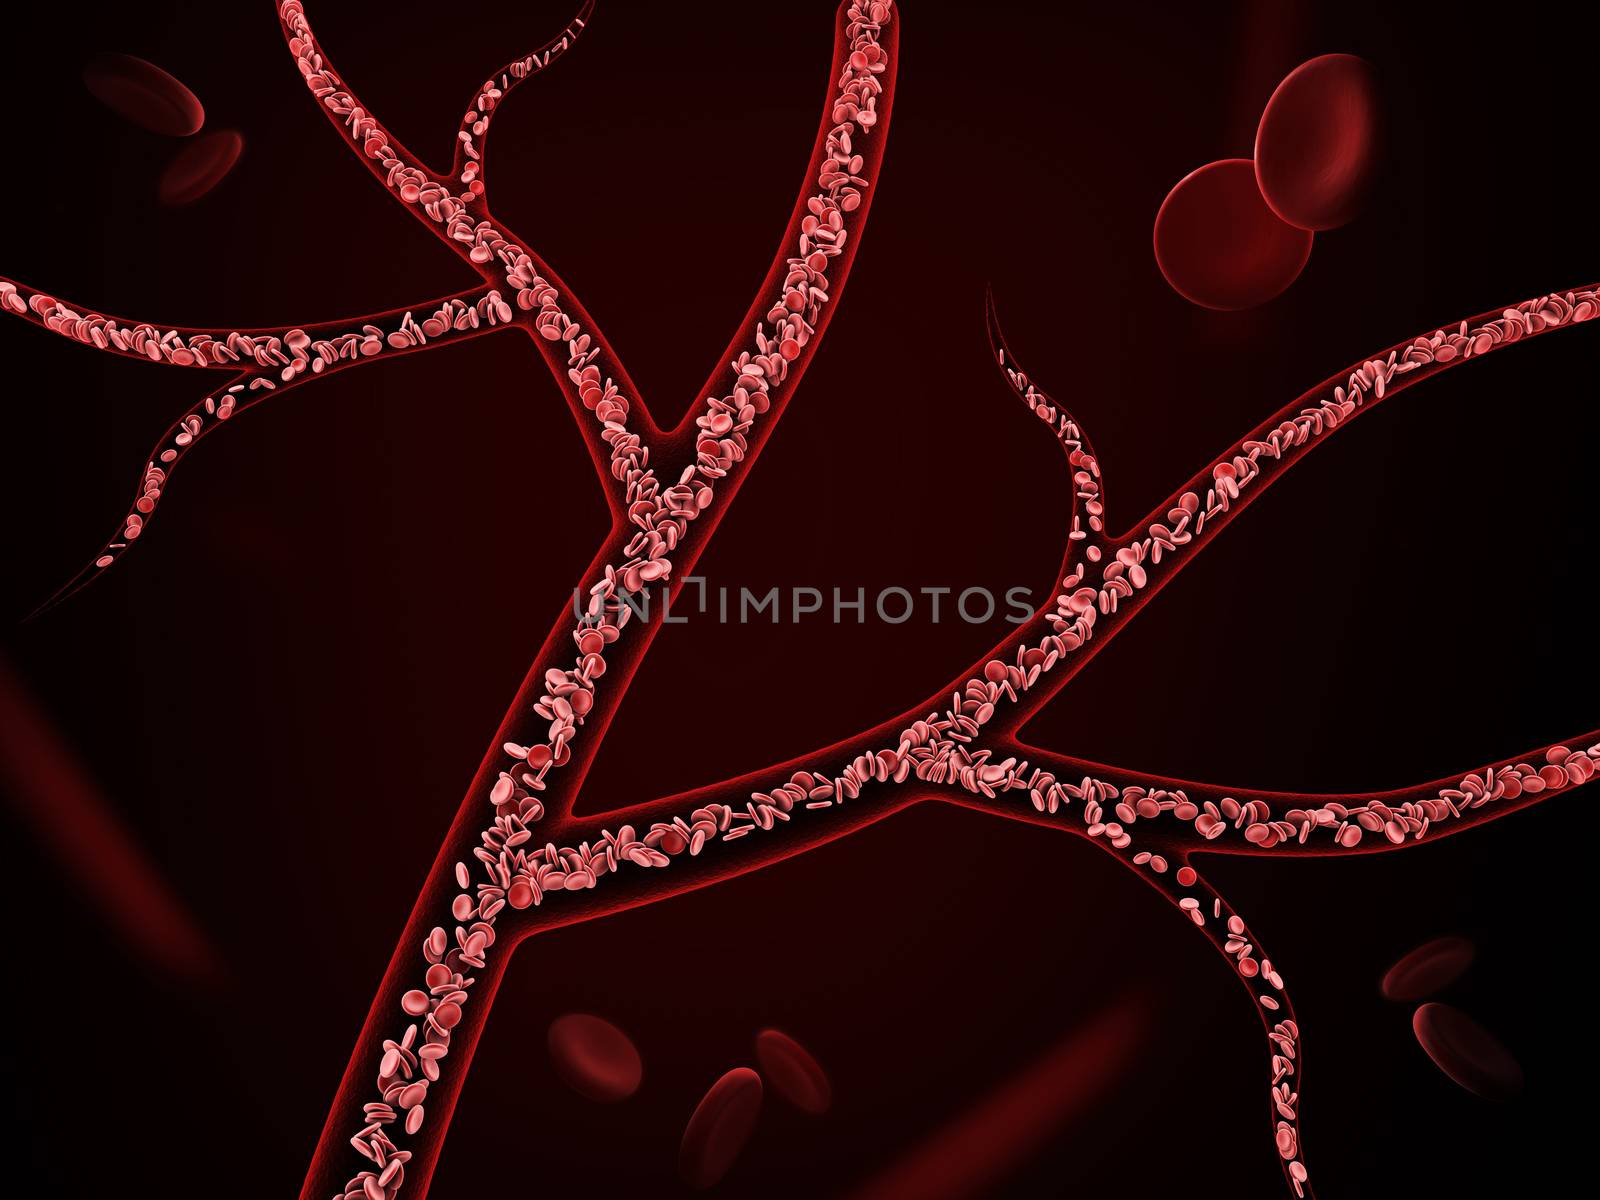 3d Illustration of red blood cells in vein on black background by tussik